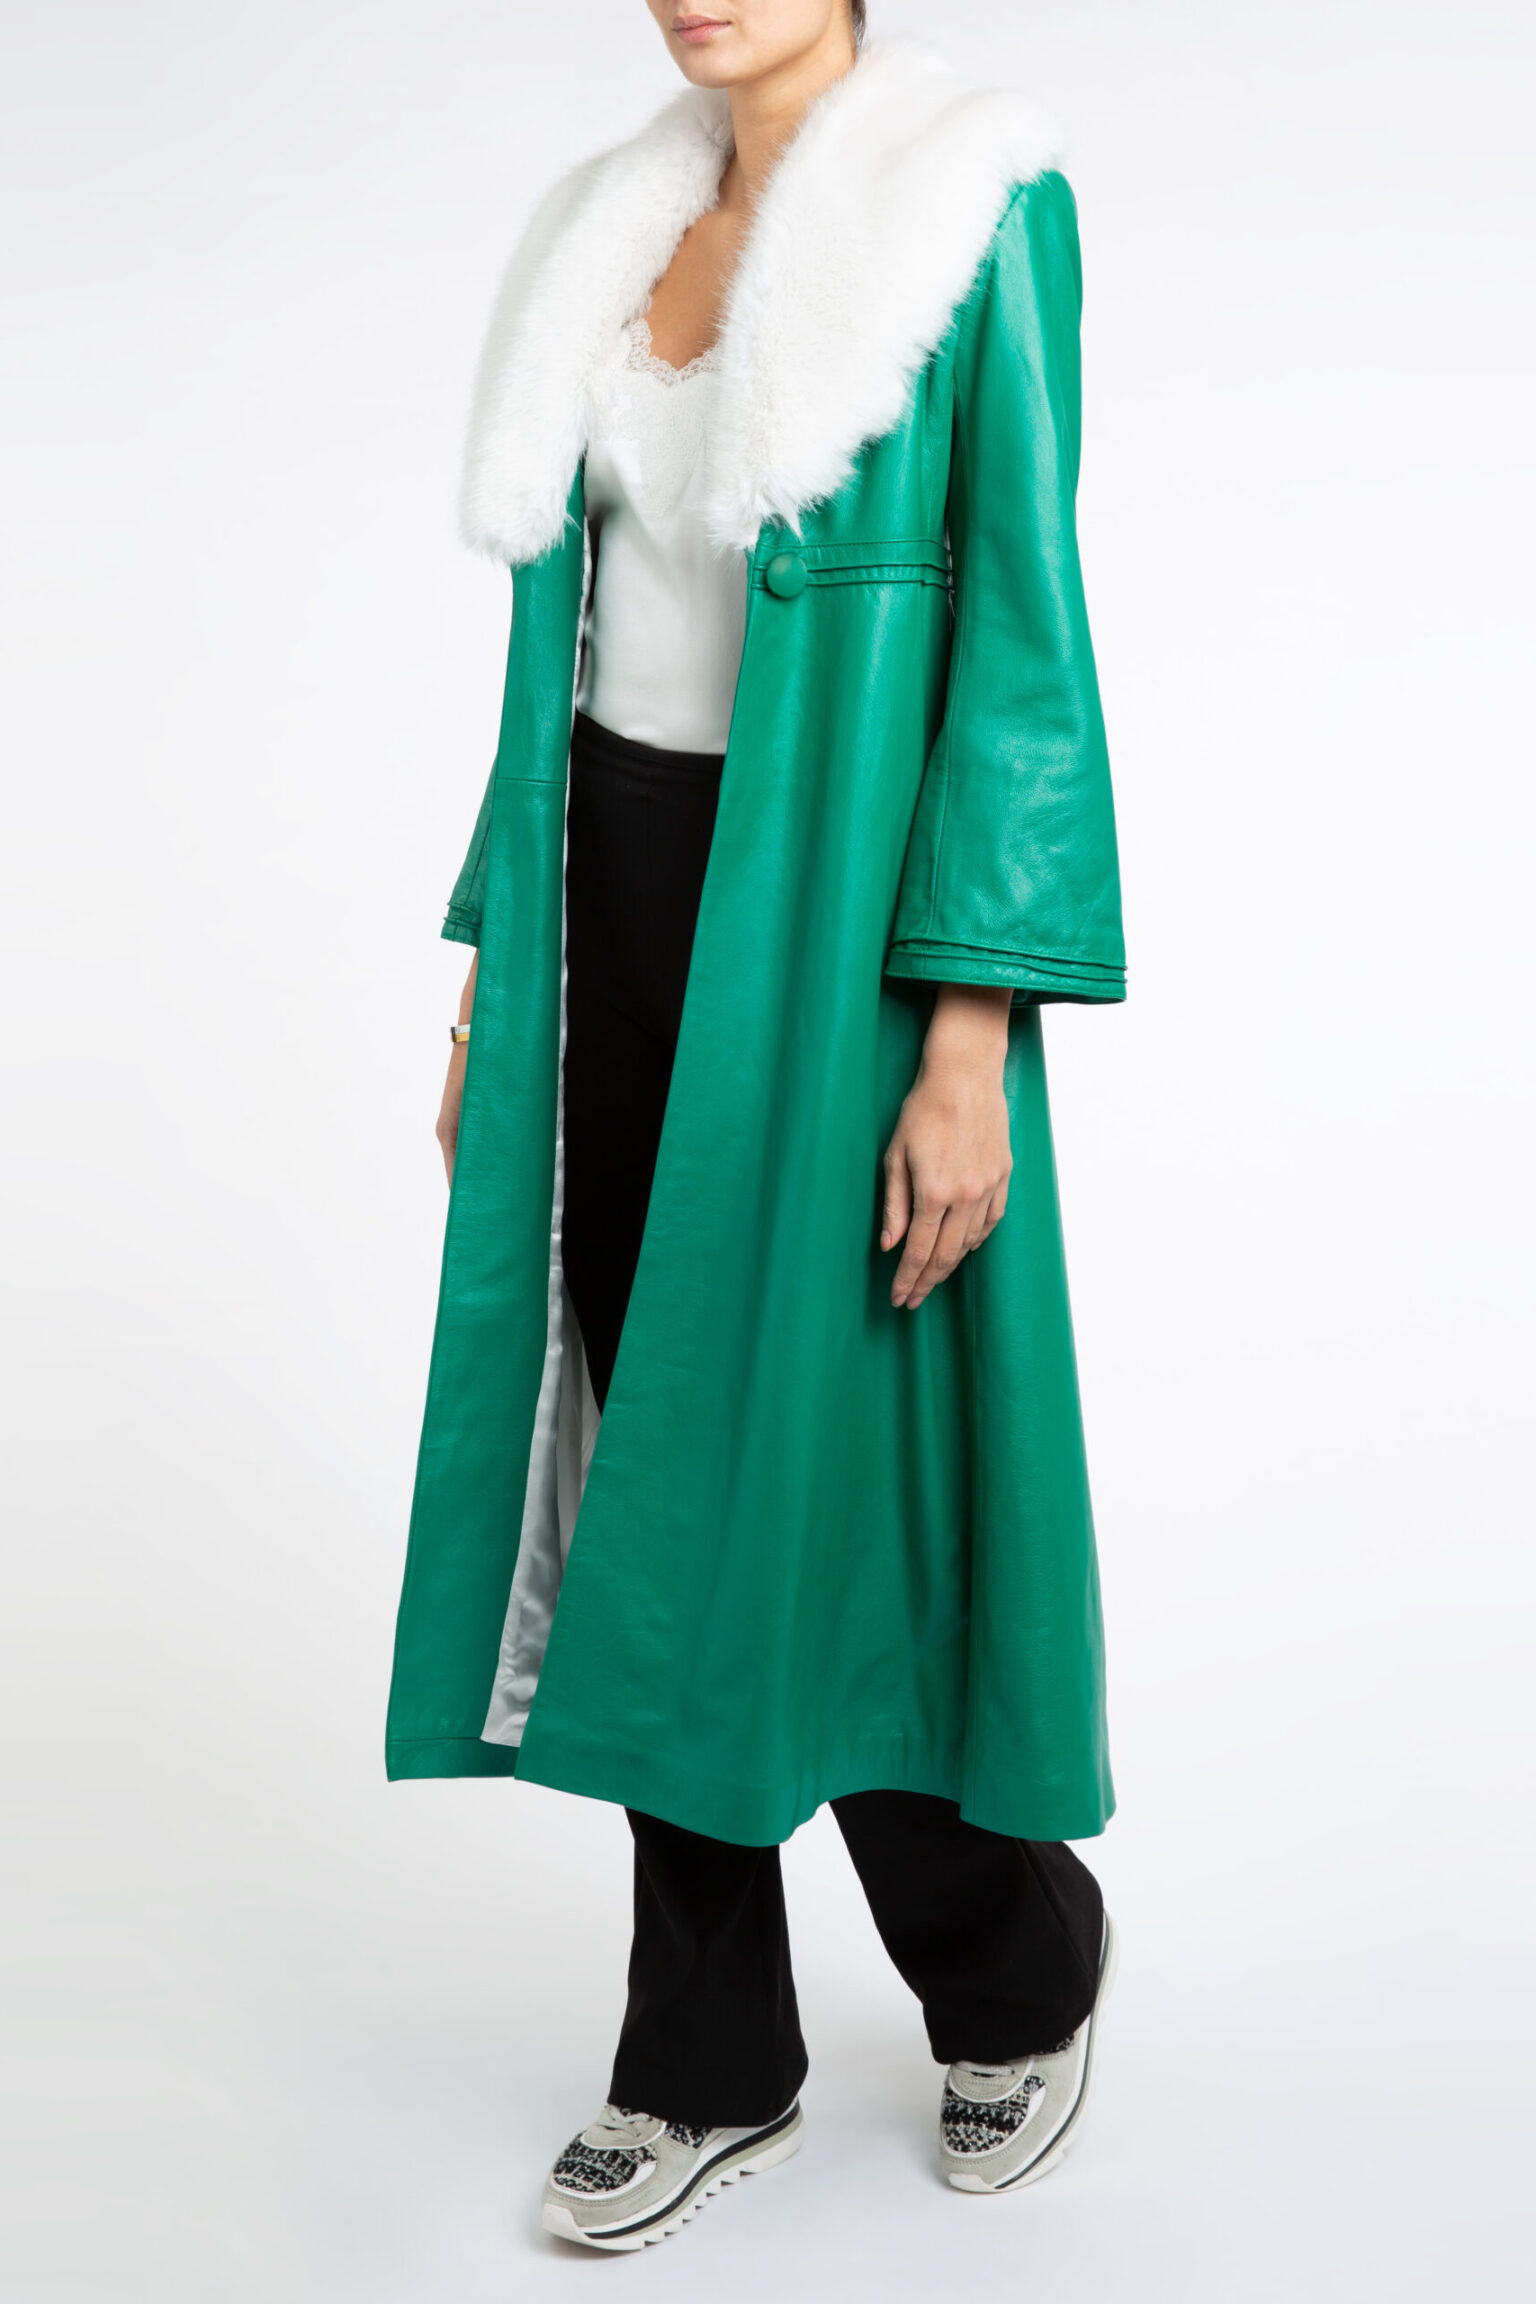 Edward Leather Trench Coat in Green and White